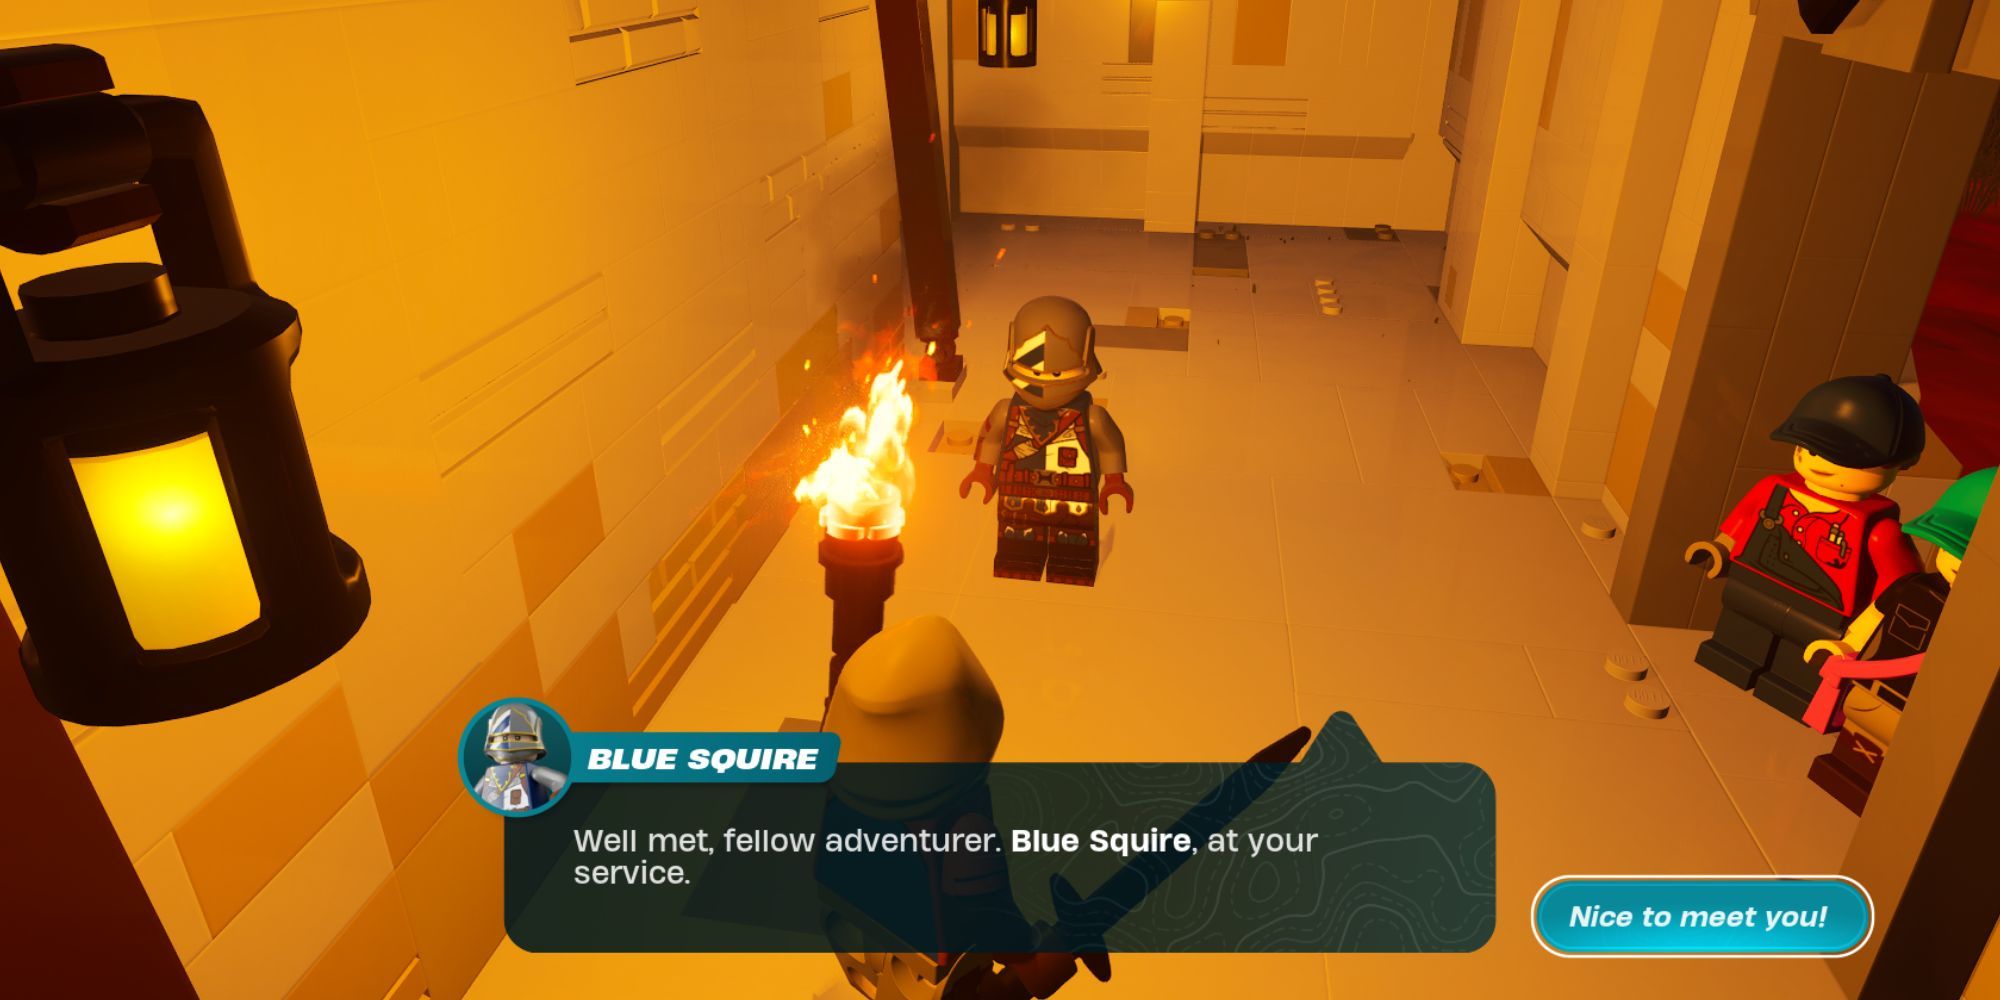 A dialogue with Blue Squire, a man wearing full medieval plate armor and a metal helmet.